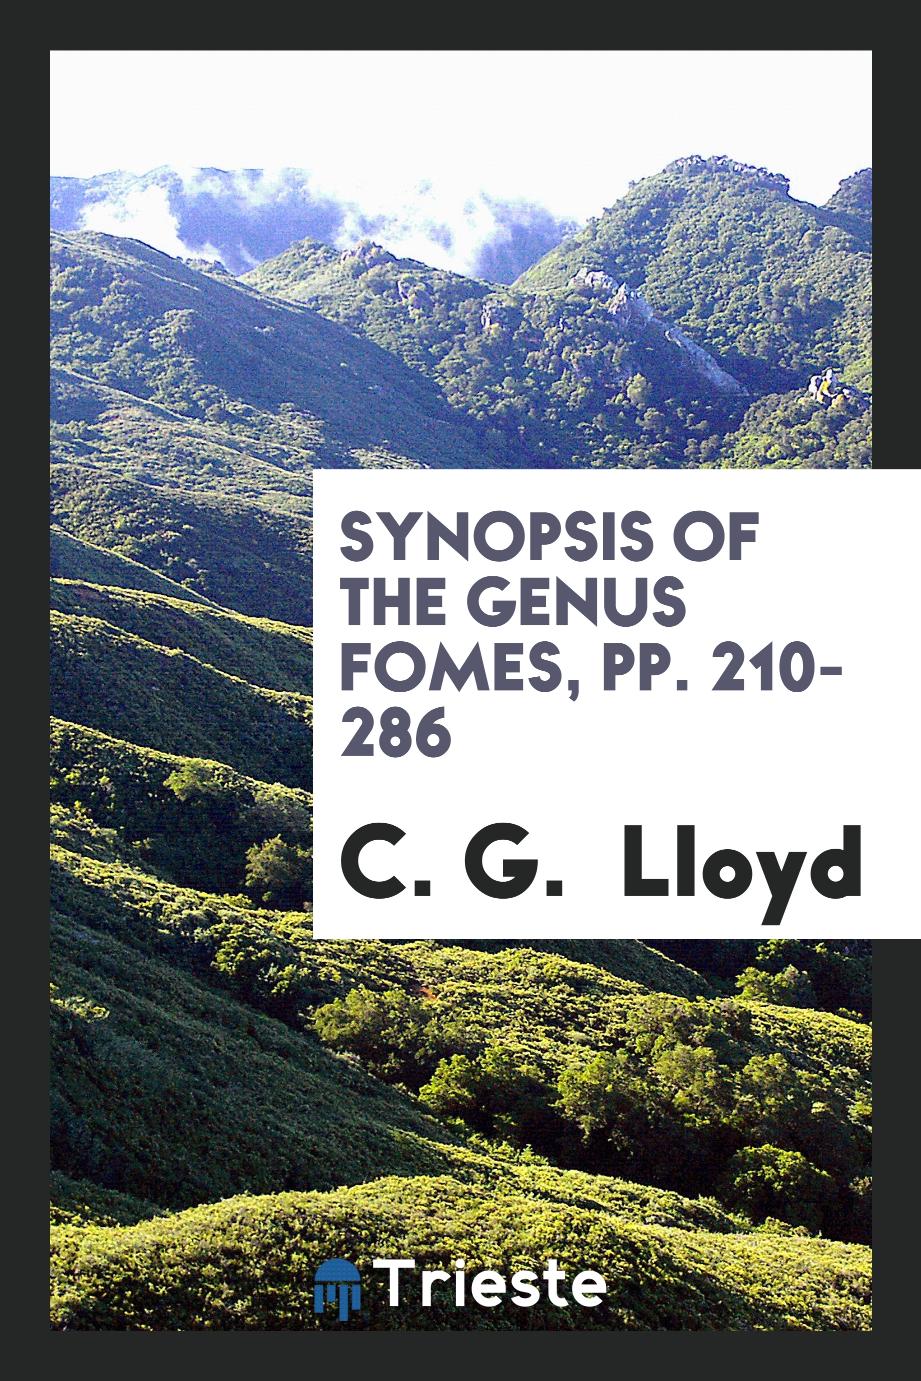 Synopsis of the Genus Fomes, pp. 210-286